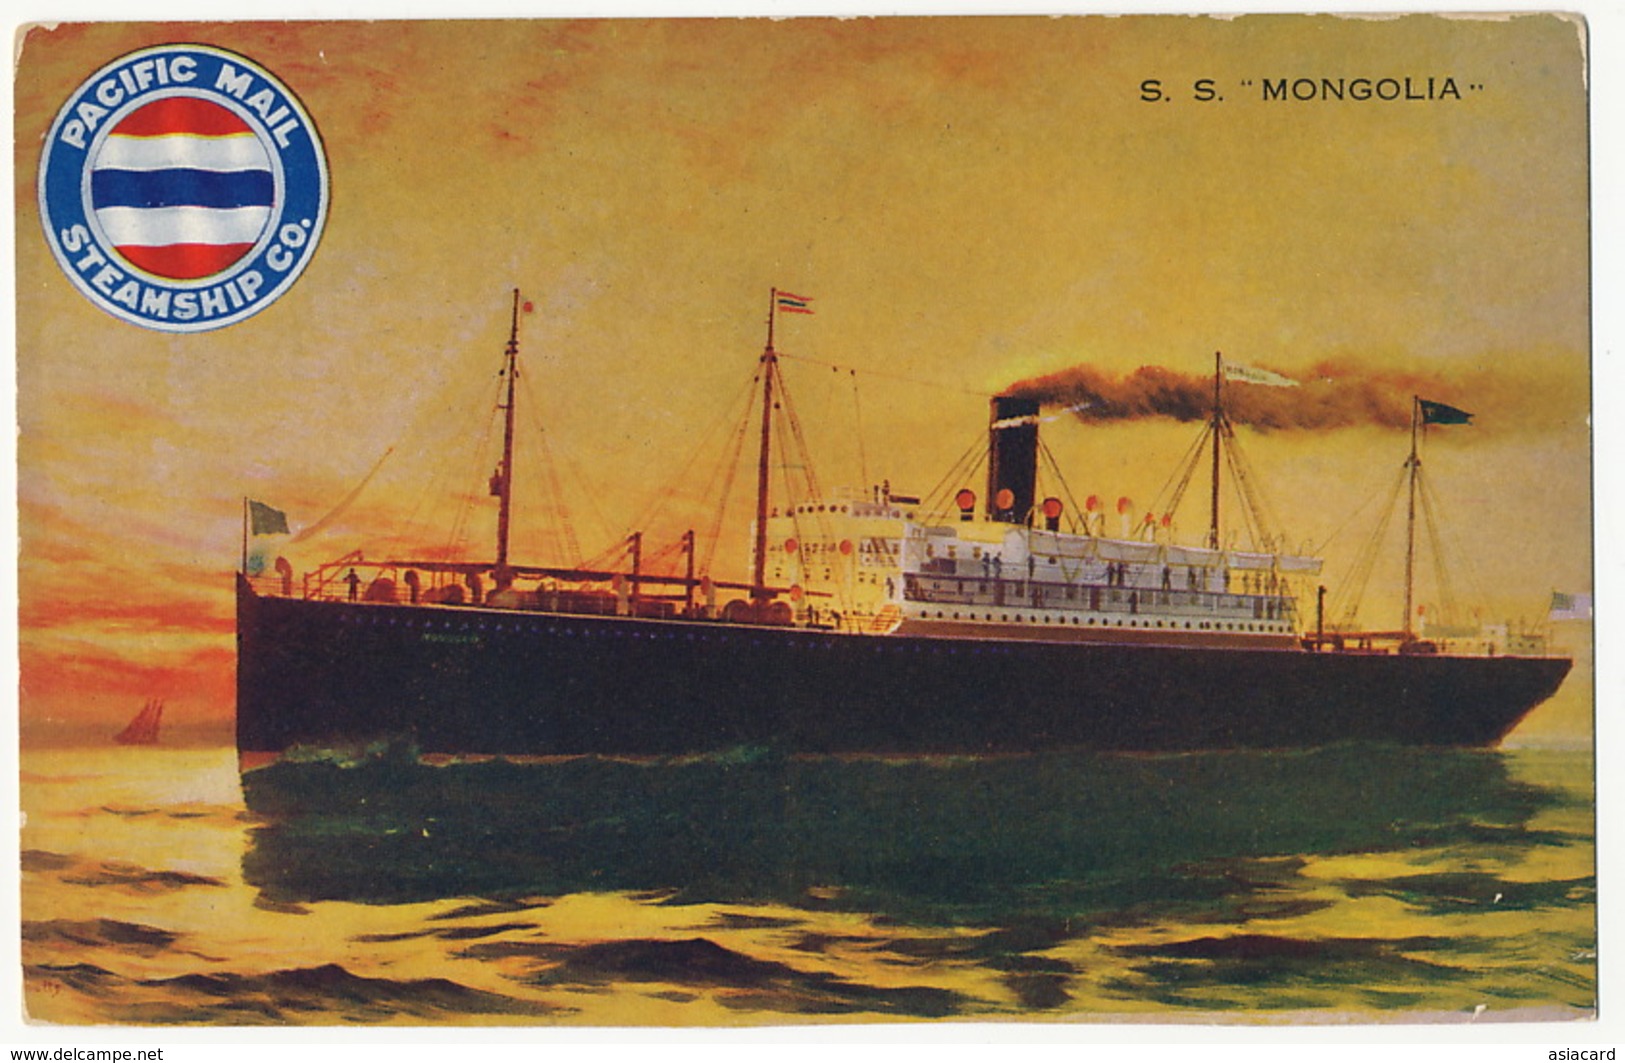 S.S. " Mongolia " Paquebot Ship Pacific Mail Steamship Co. - Mongolei